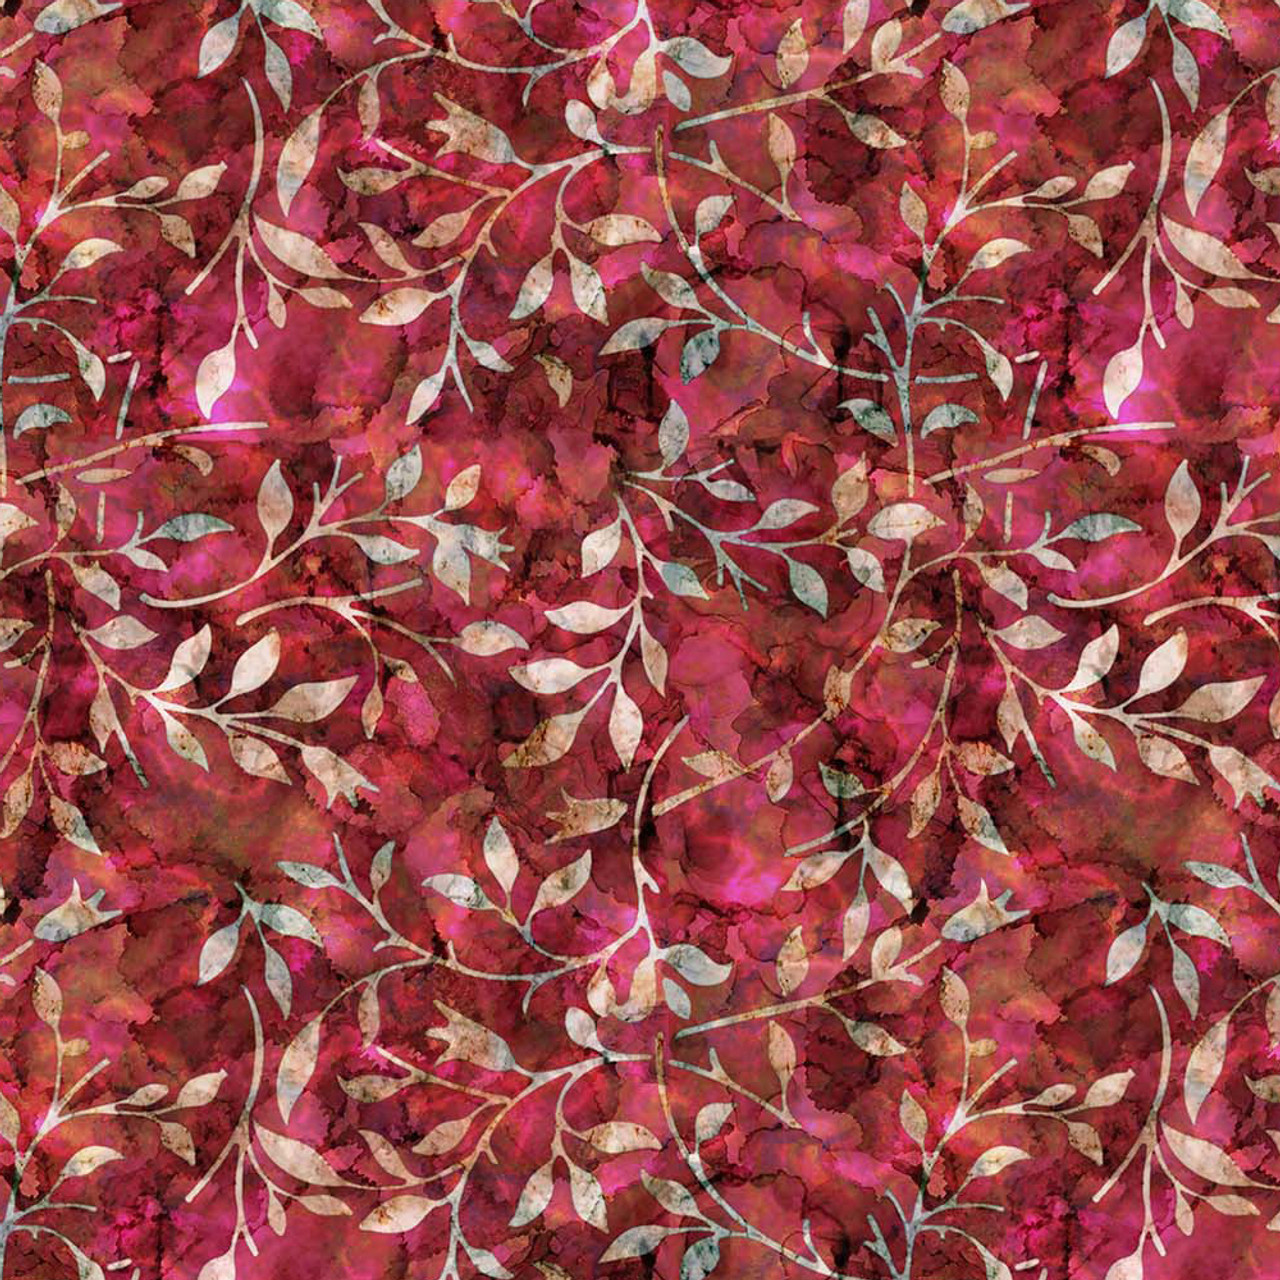 Pinks & Reds Leaf Trail Batik-style 100% Cotton Fabric, 140cm/55in wide (Sold Per HALF Metre)